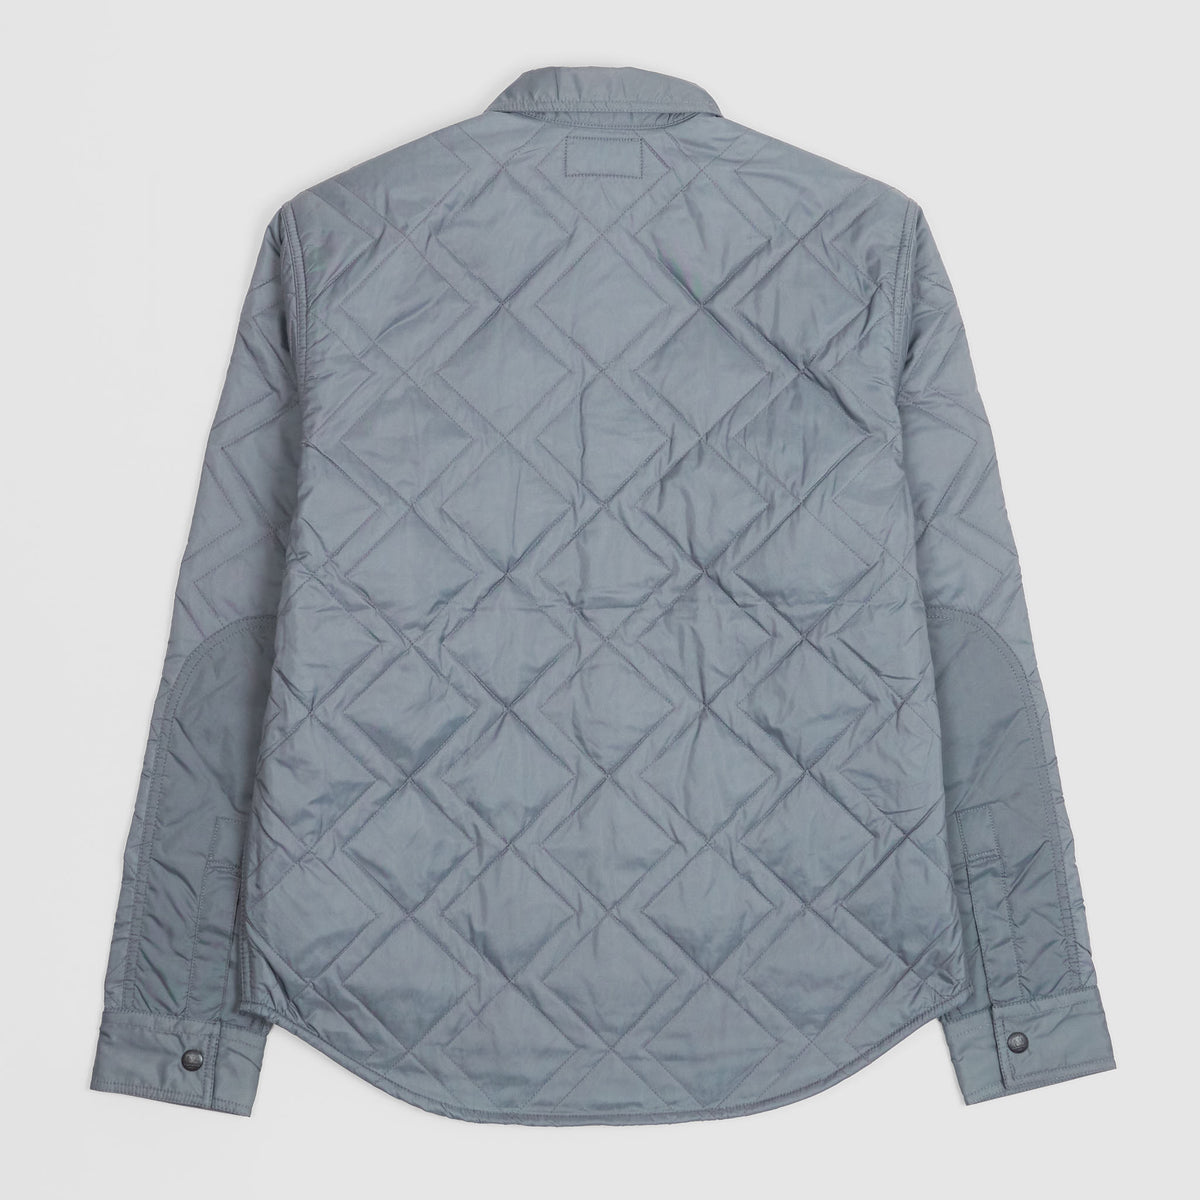 Double RL Quilted CPO Jacket